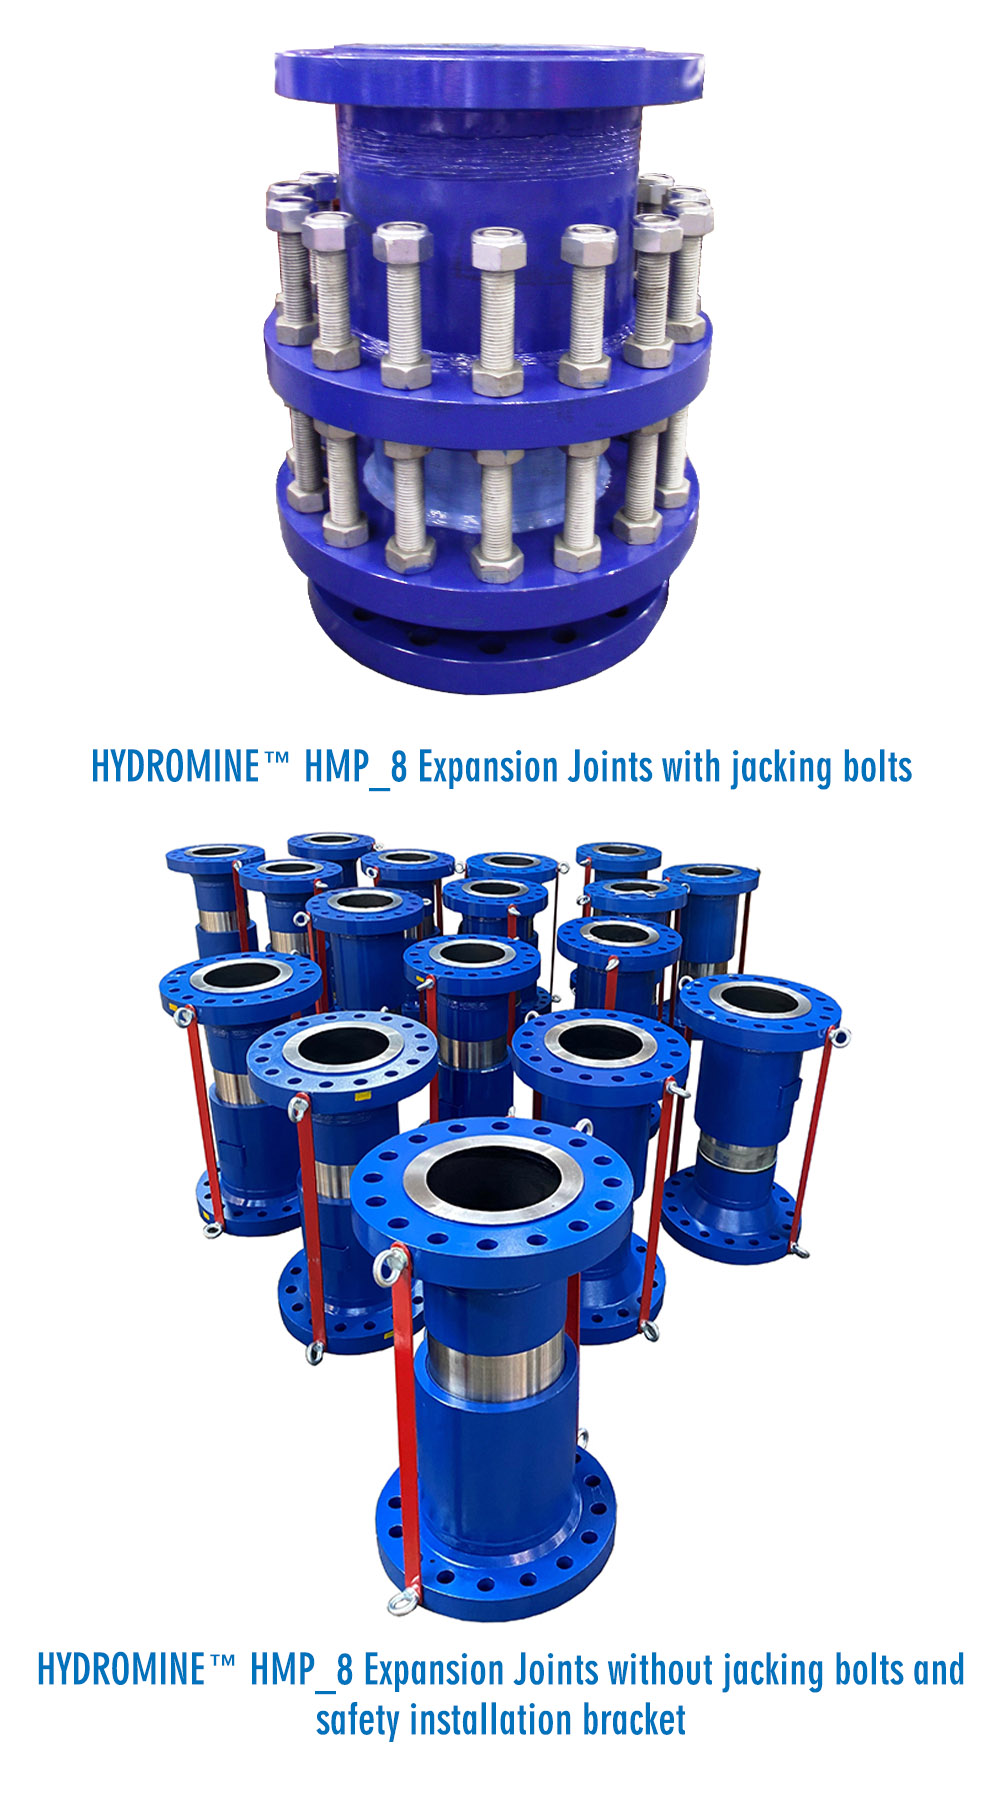 HYDROMINE HMP 8 Range Of Expansion Joints